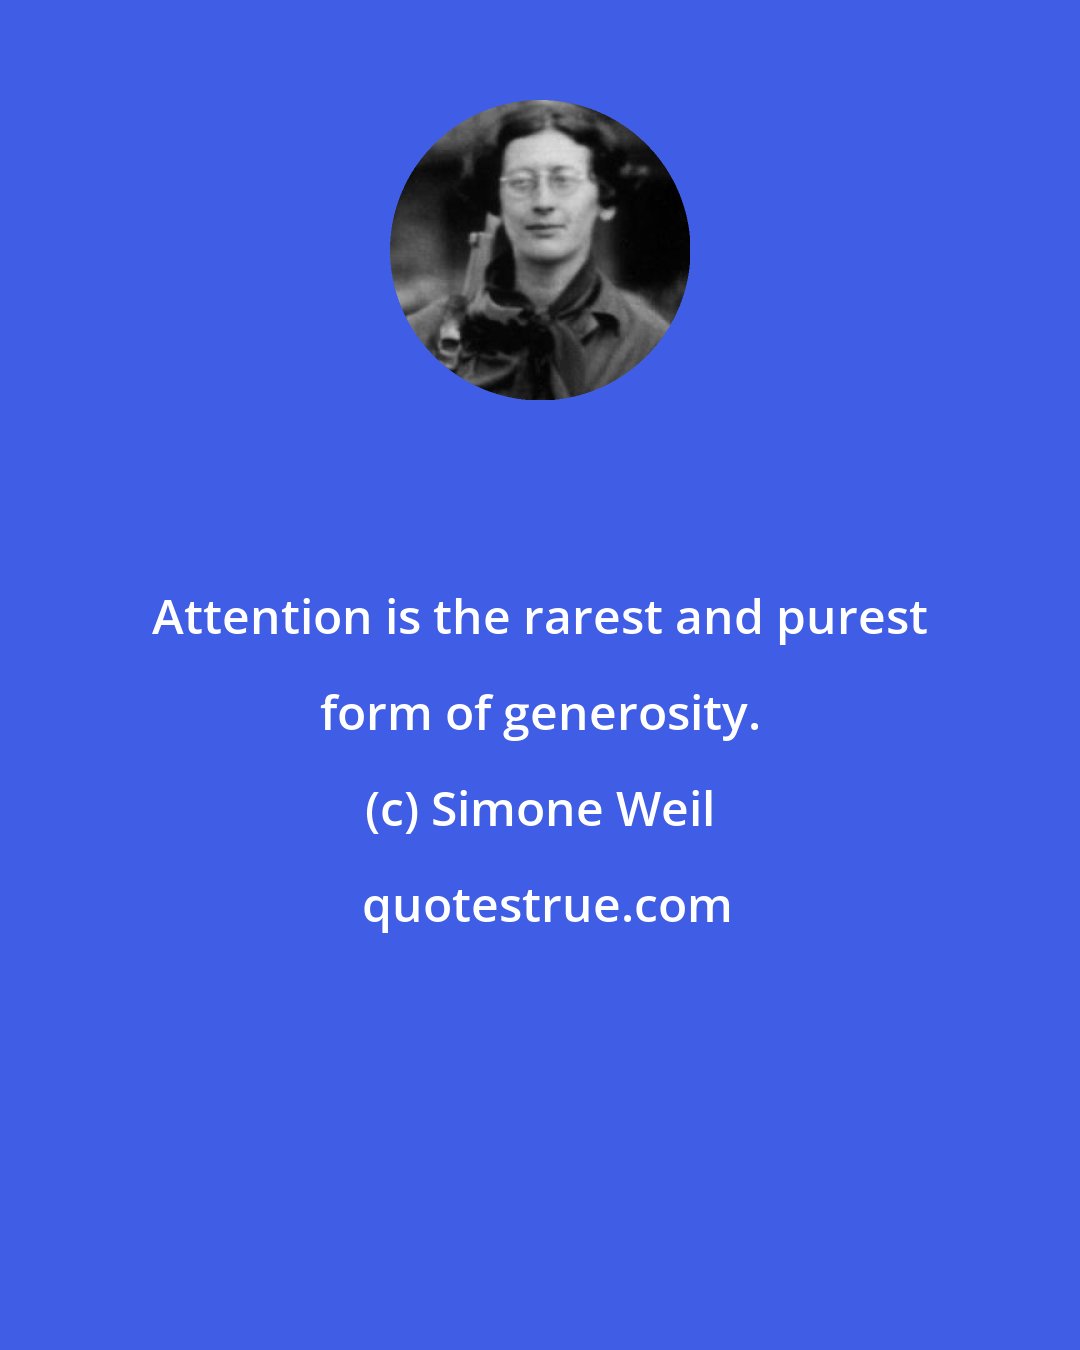 Simone Weil: Attention is the rarest and purest form of generosity.